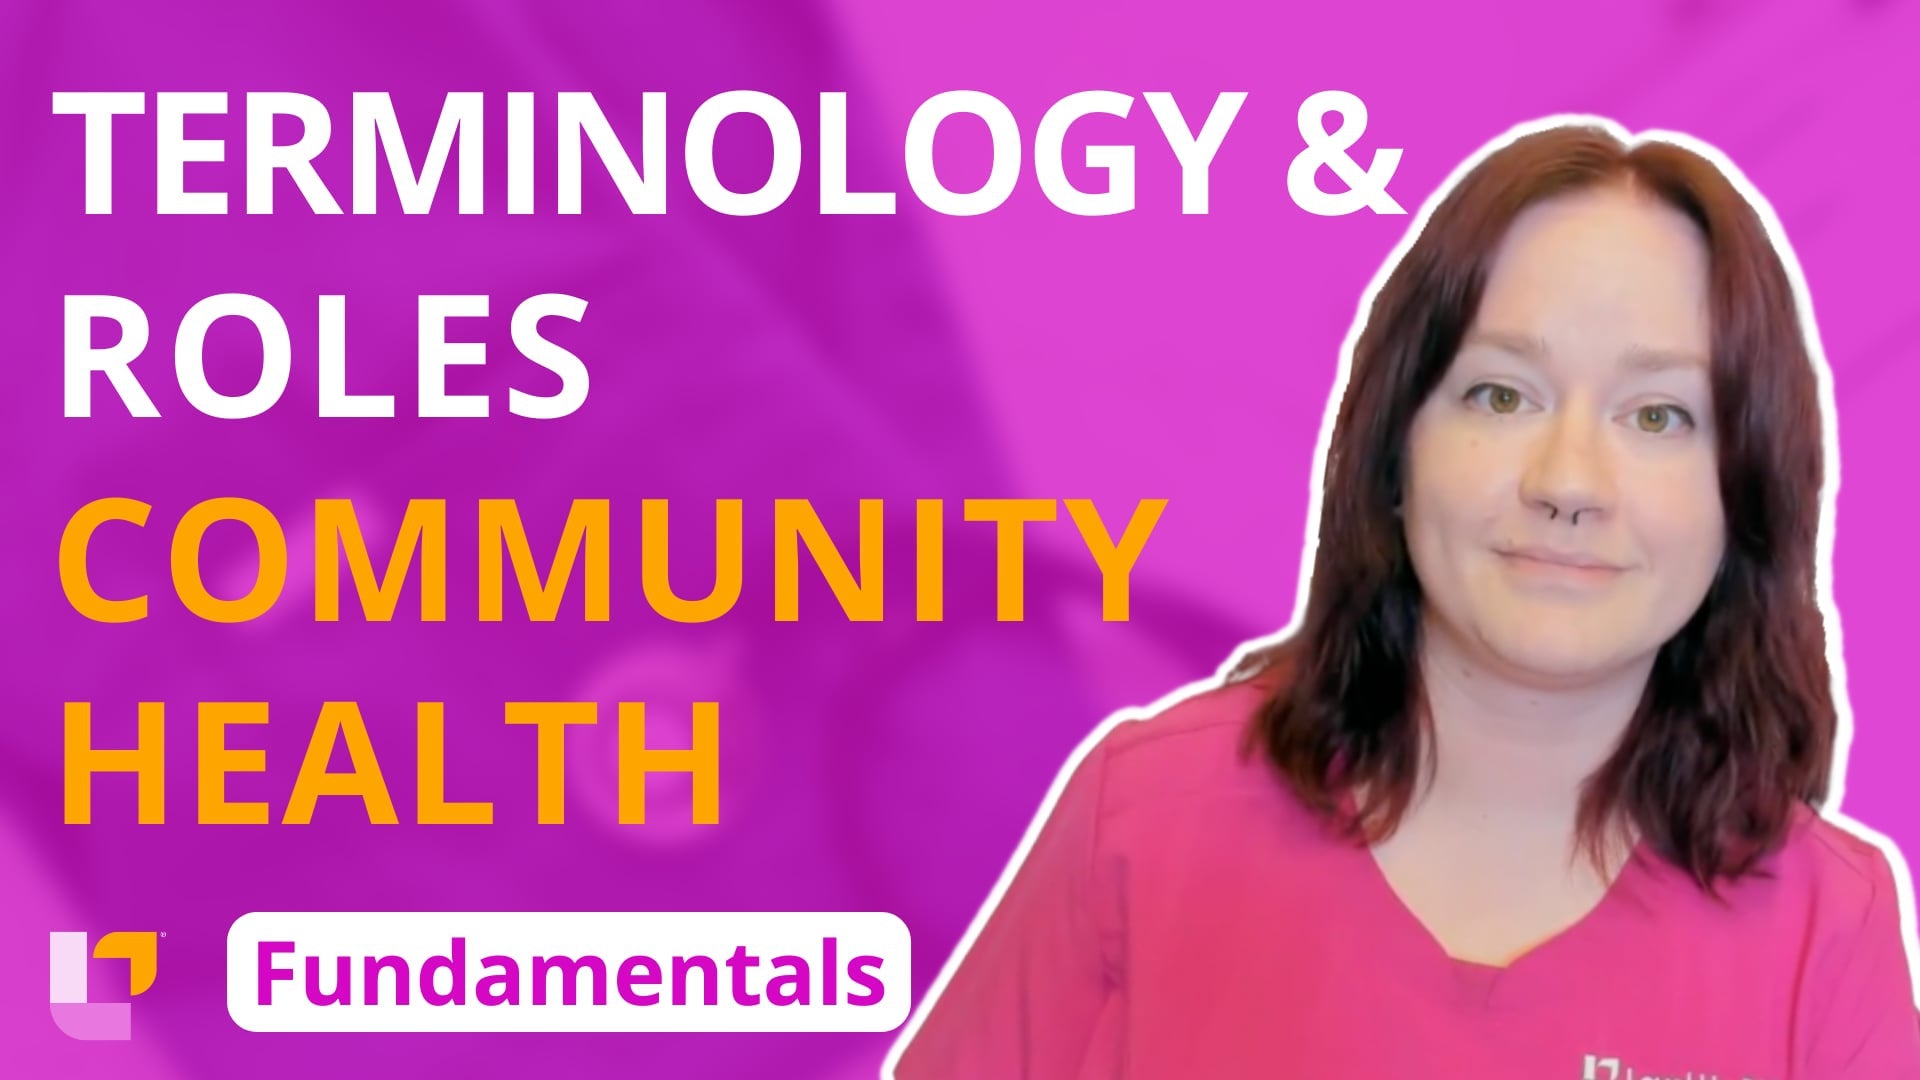 Fundamentals - Community Health, part 1: Terminology and Roles - LevelUpRN